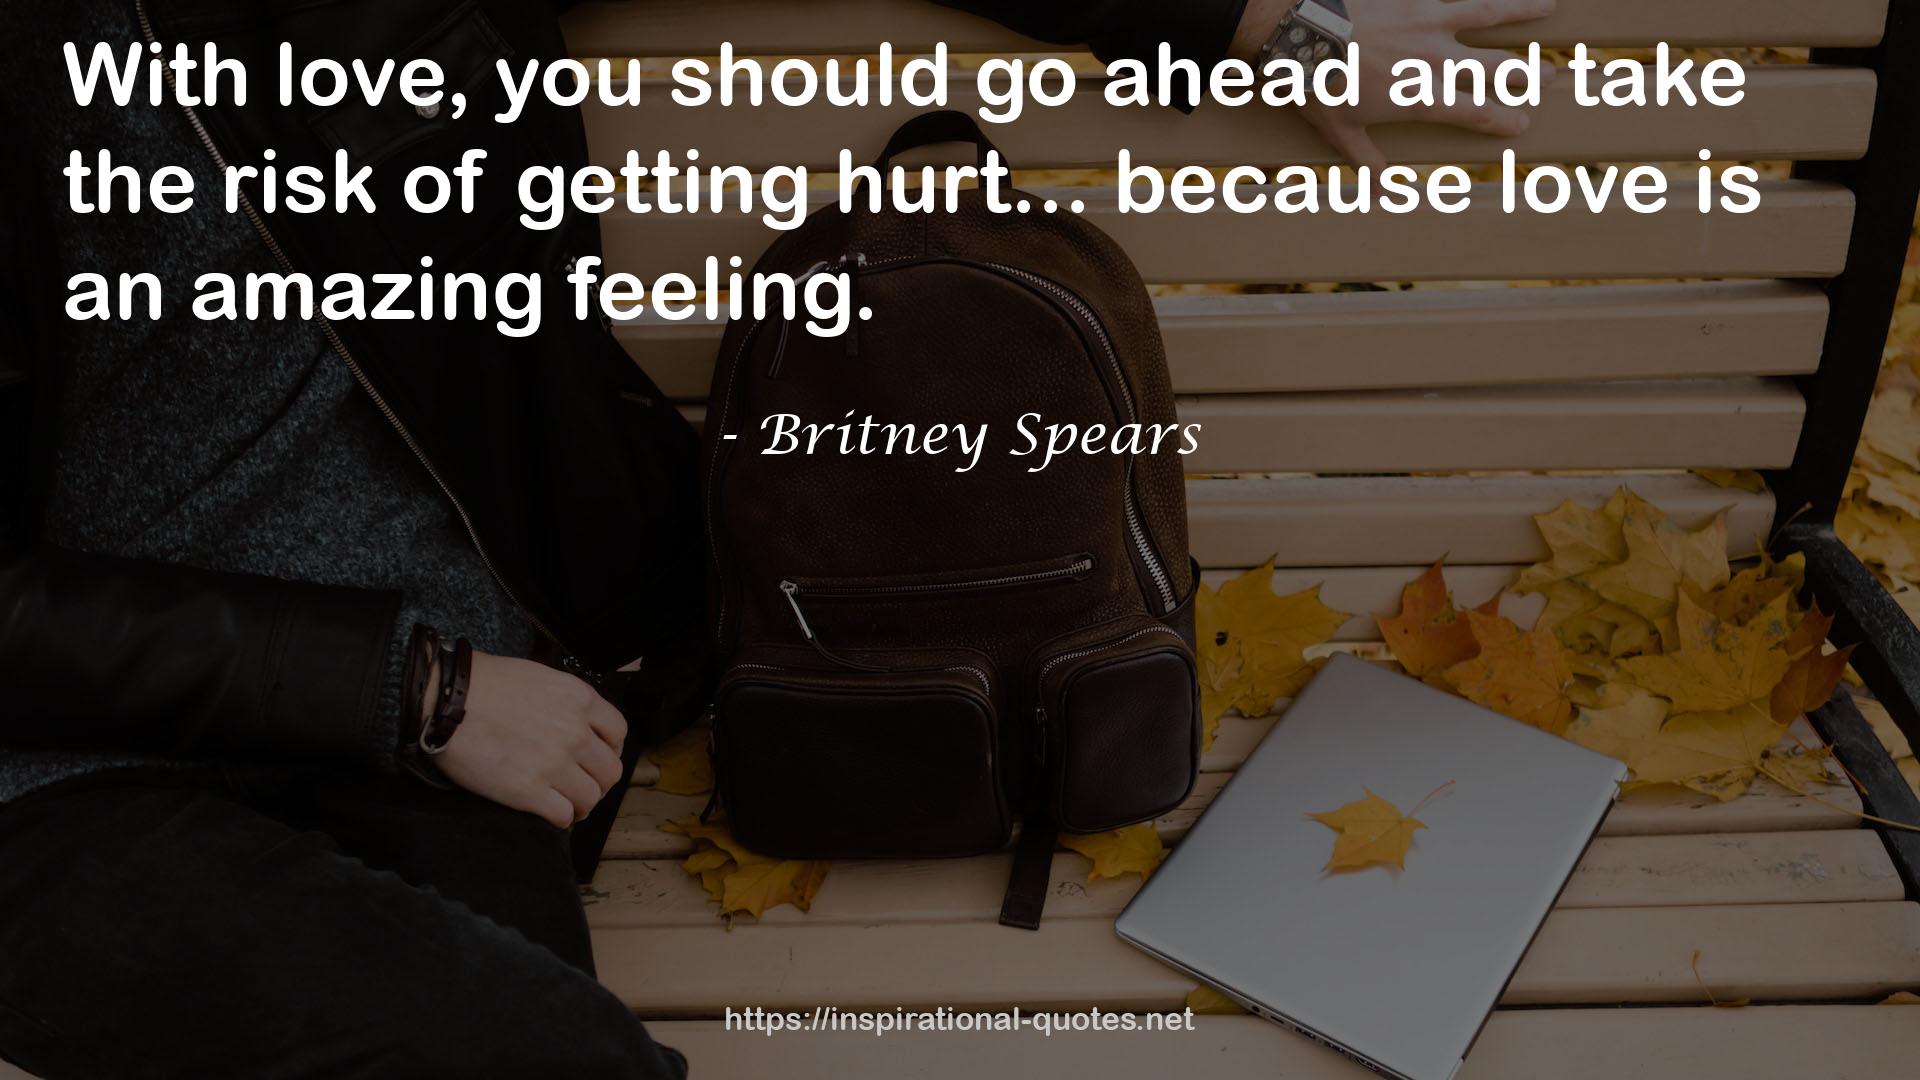 Britney Spears QUOTES